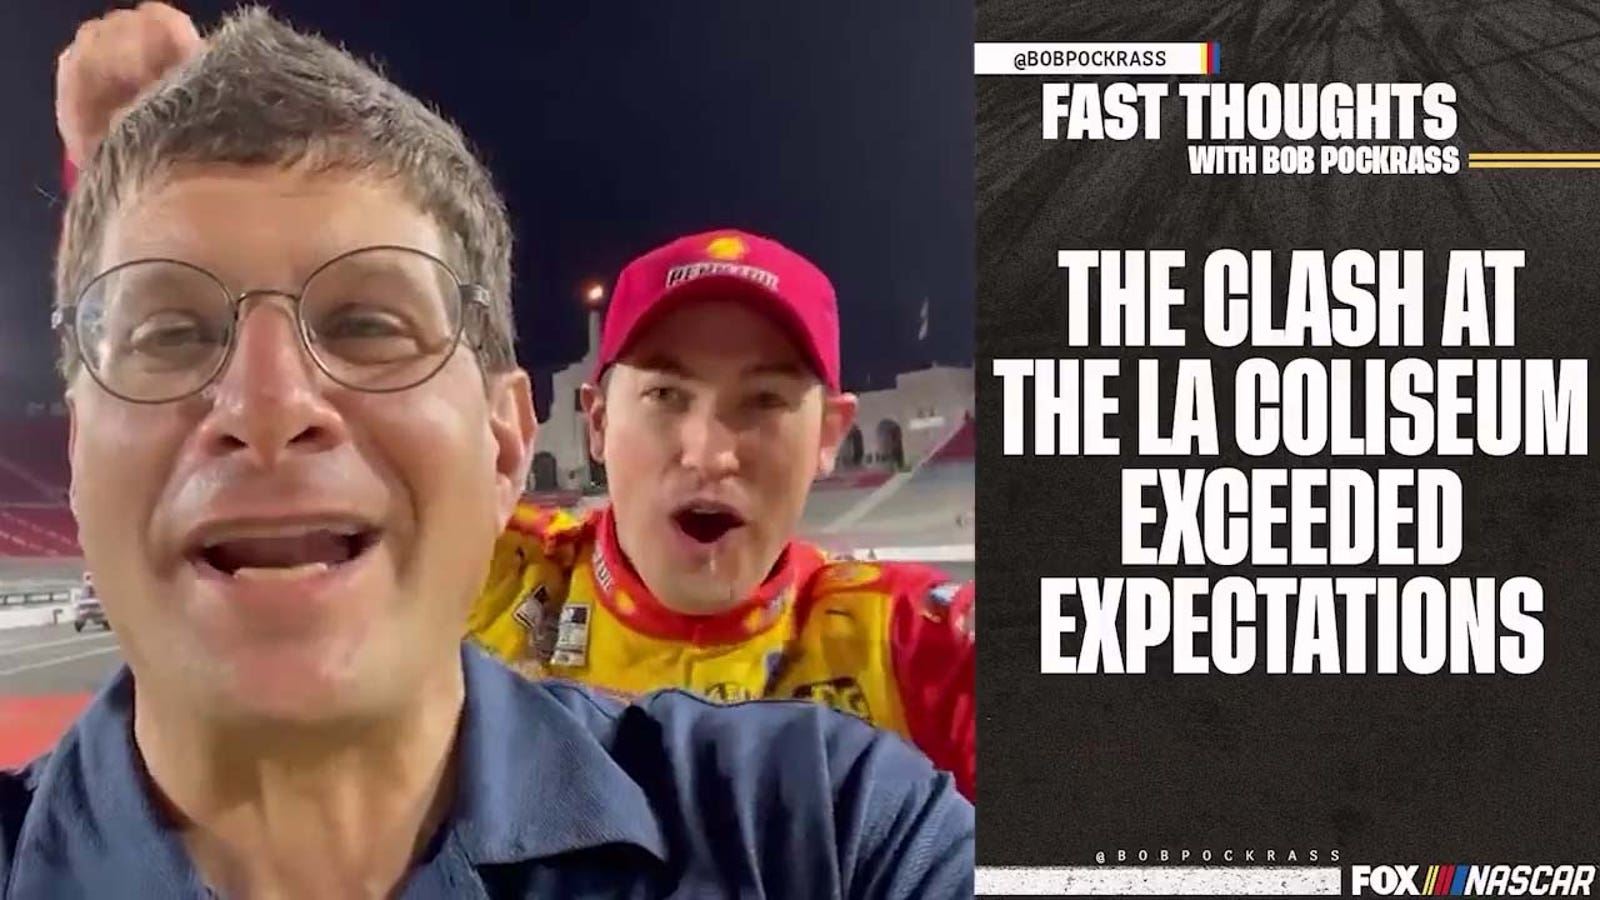 'It exceeded expectations' — Bob Pockrass on the success of The Clash at the Coliseum